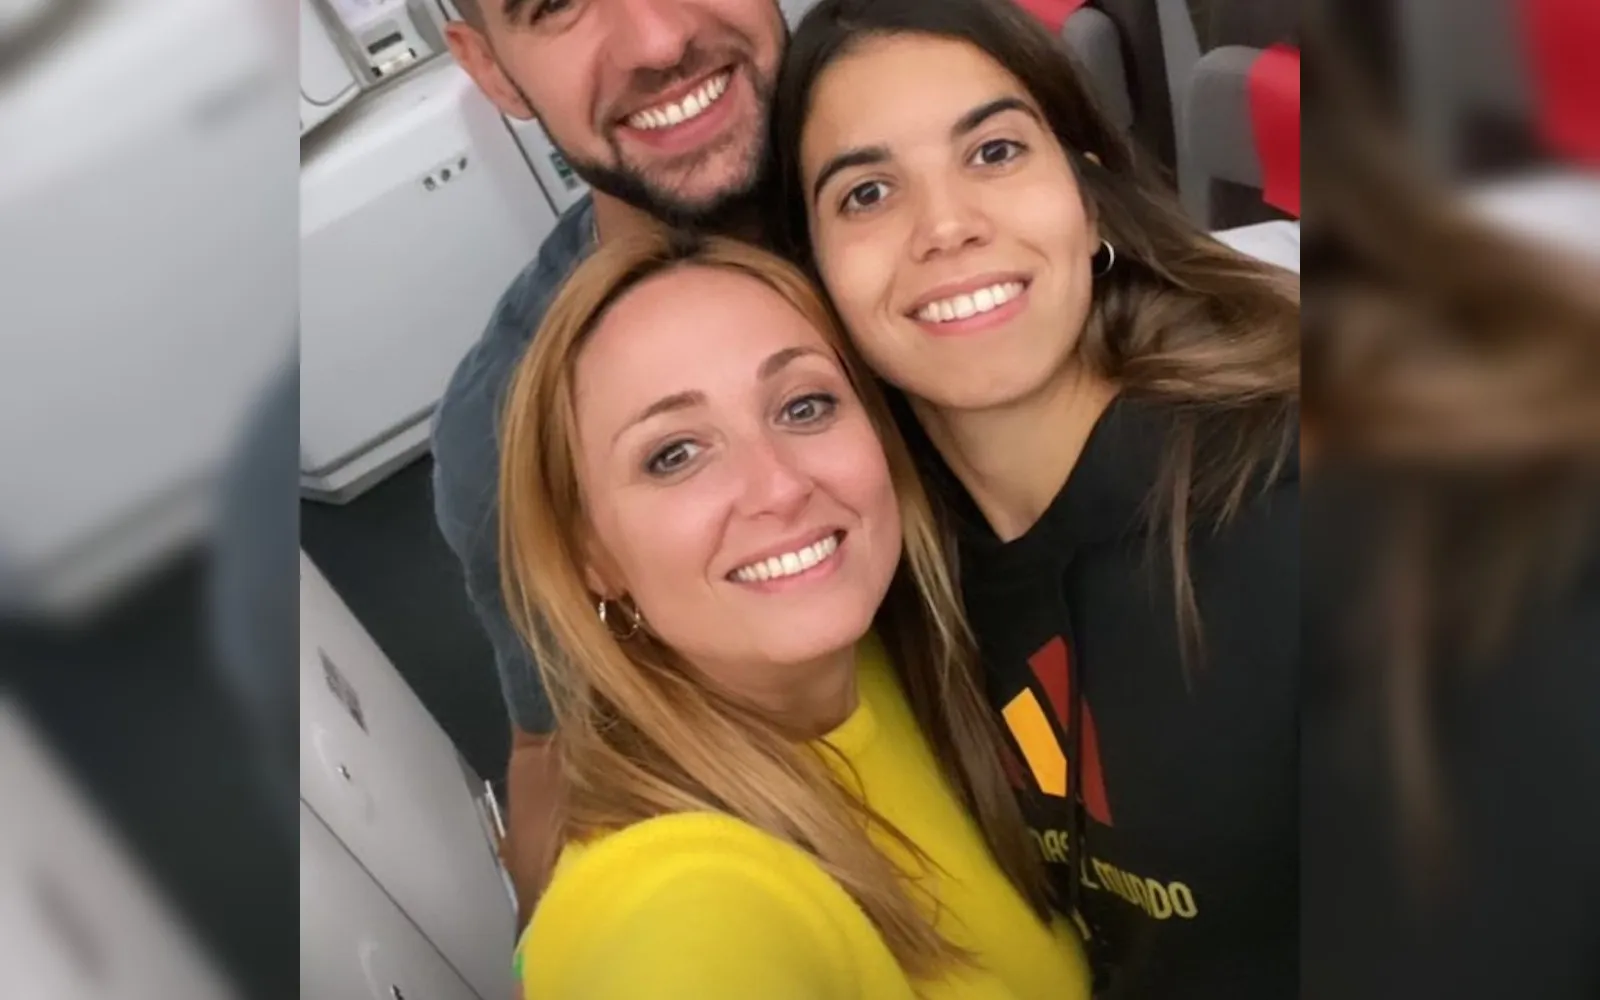 Alba Redondo and partner look loved up after Spain World Cup